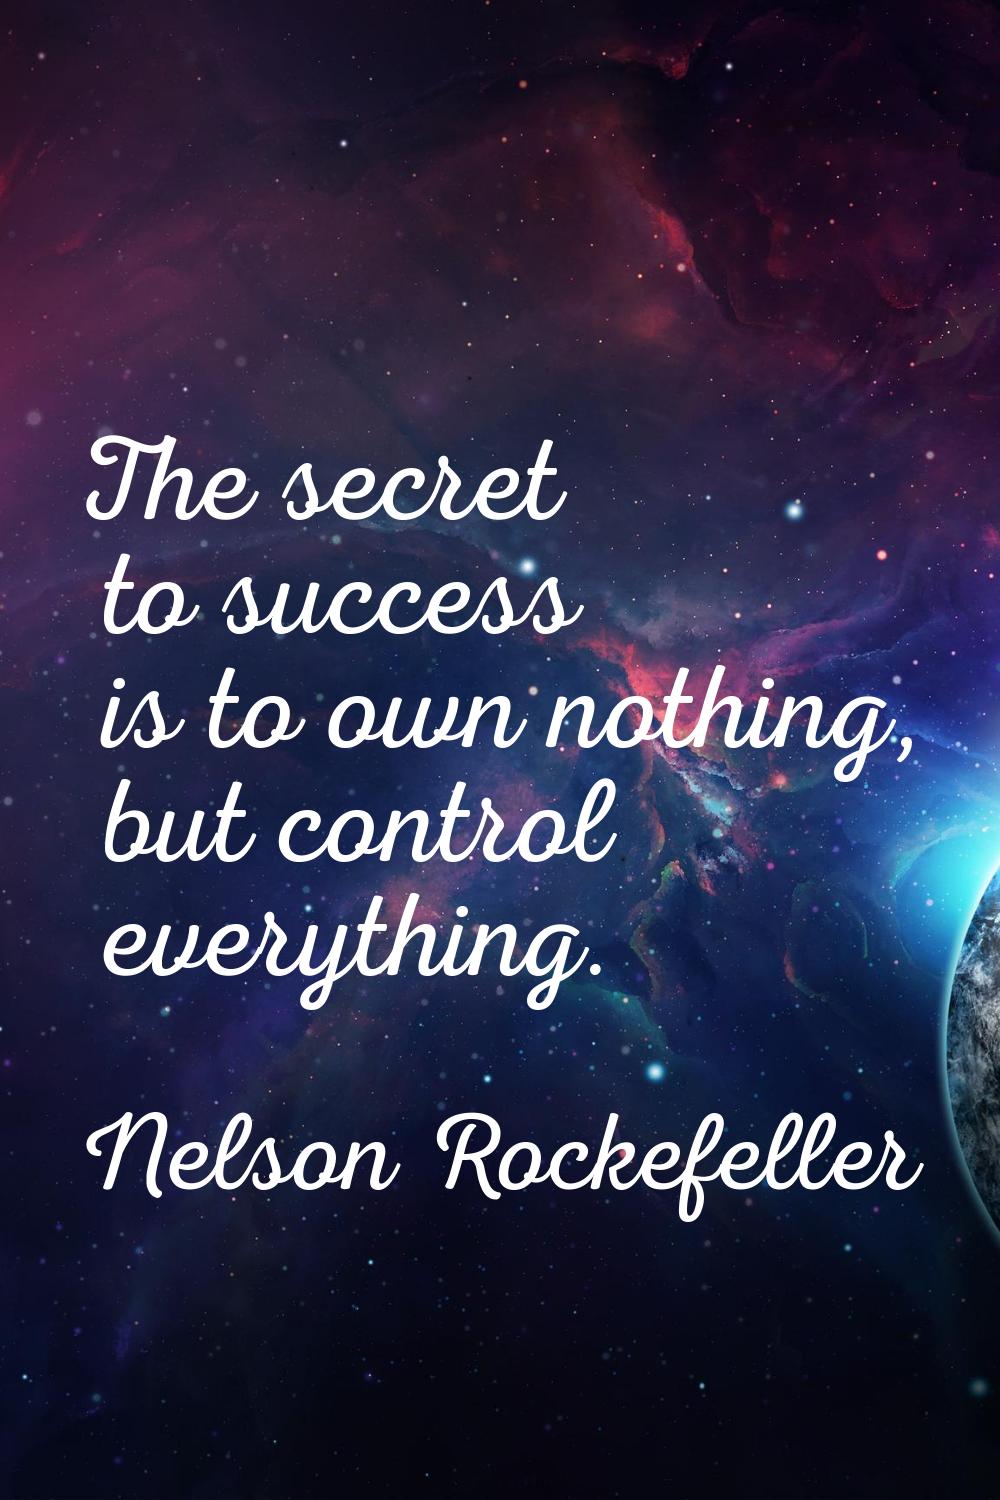 The secret to success is to own nothing, but control everything.